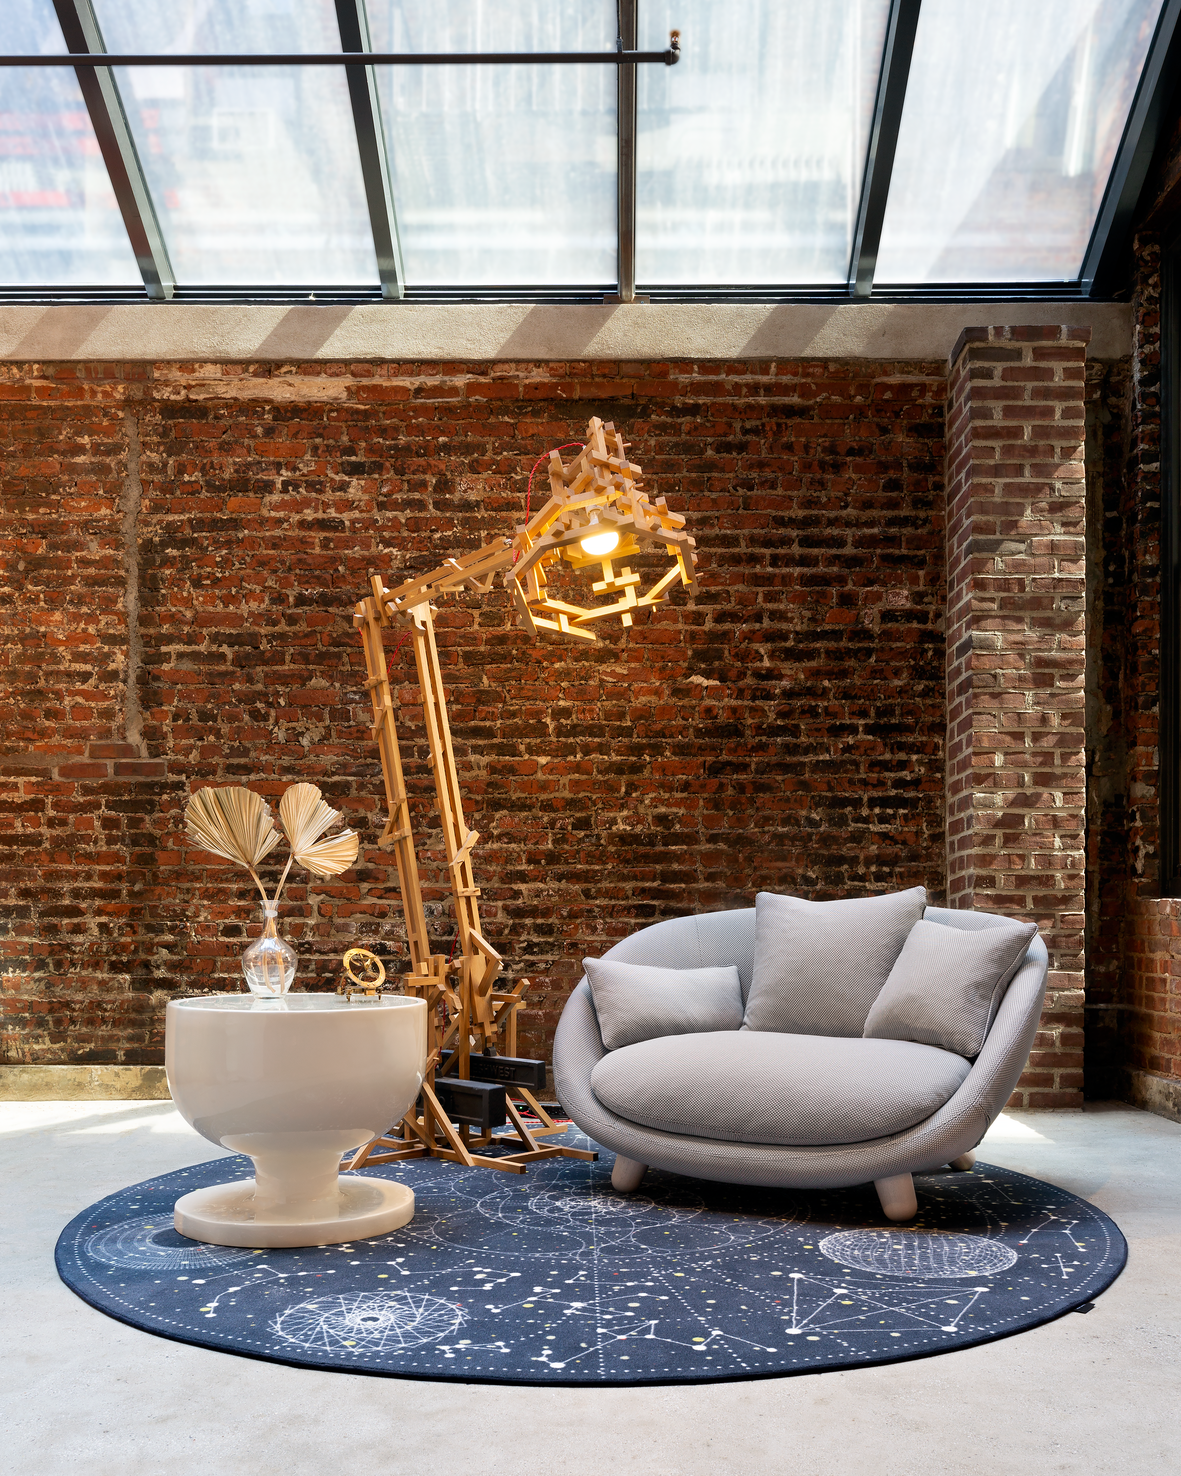 Interior of New York Showroom with Love Sofa, Brave New World floor lamp and Moooi Carpet